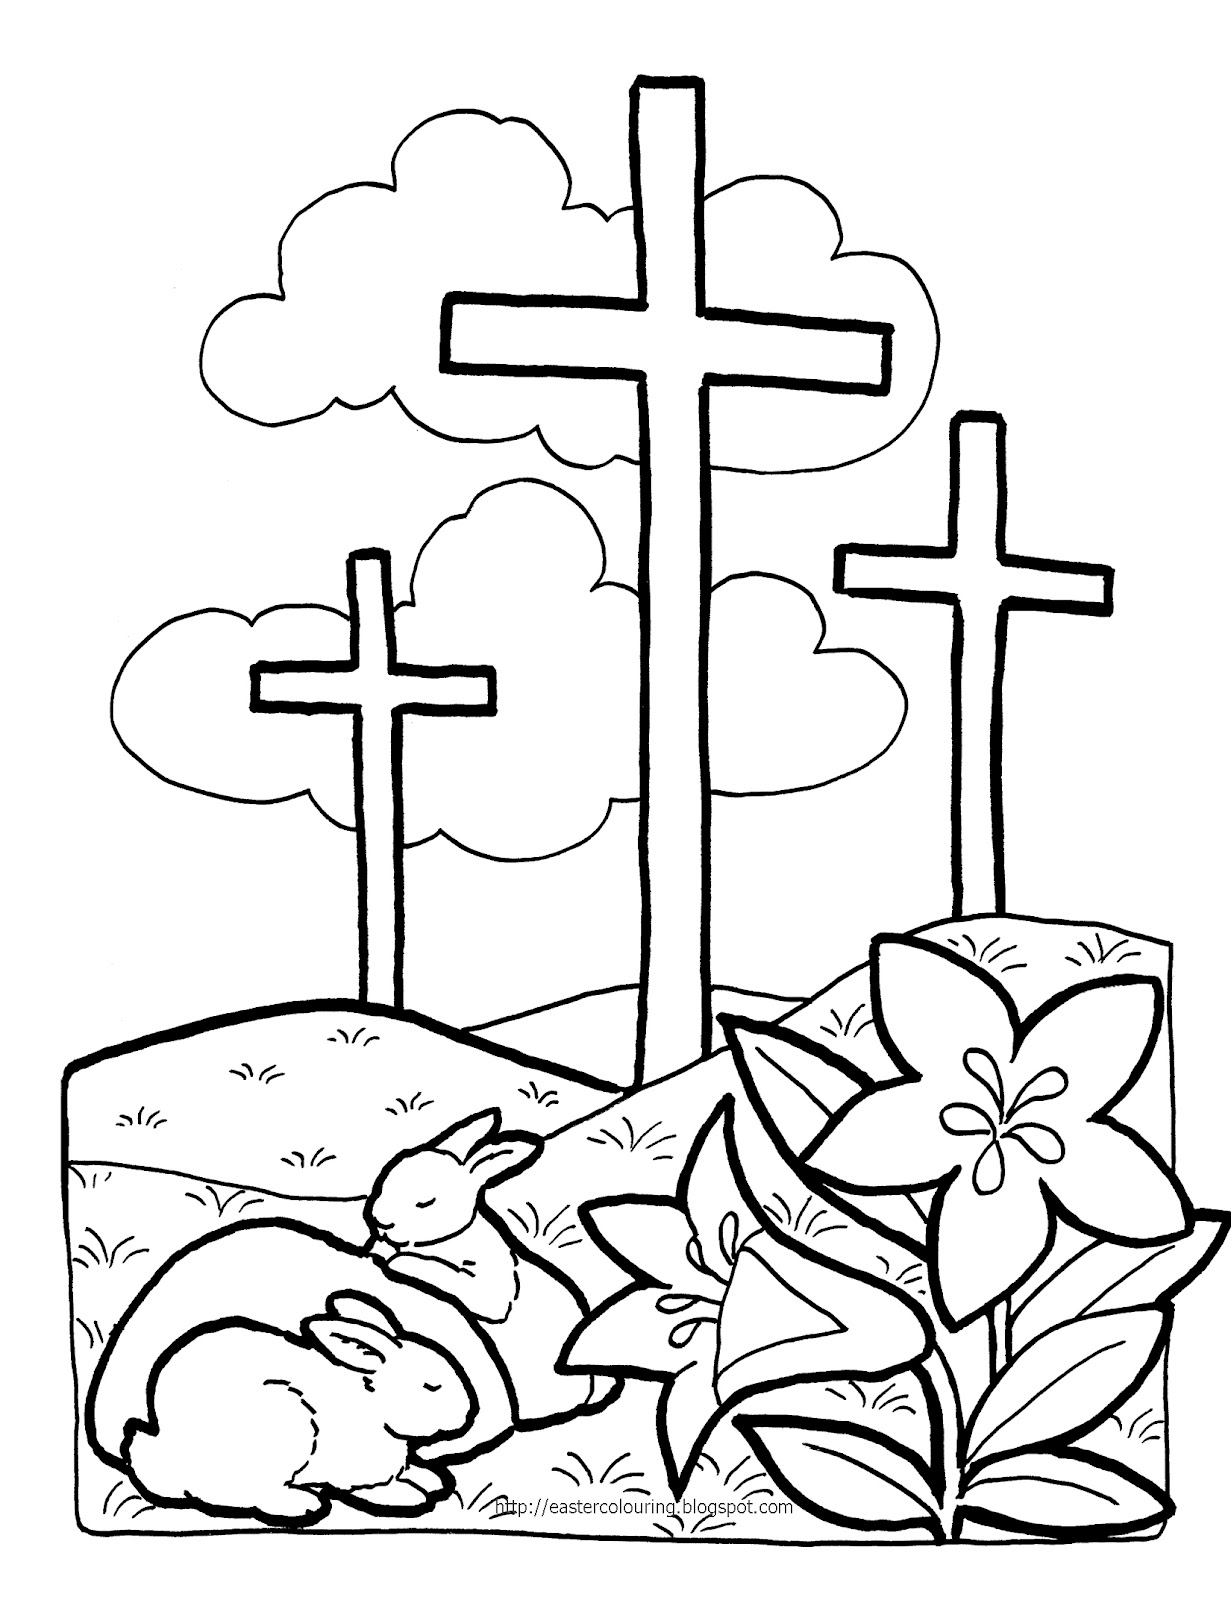 easter clip art images christian - photo #39